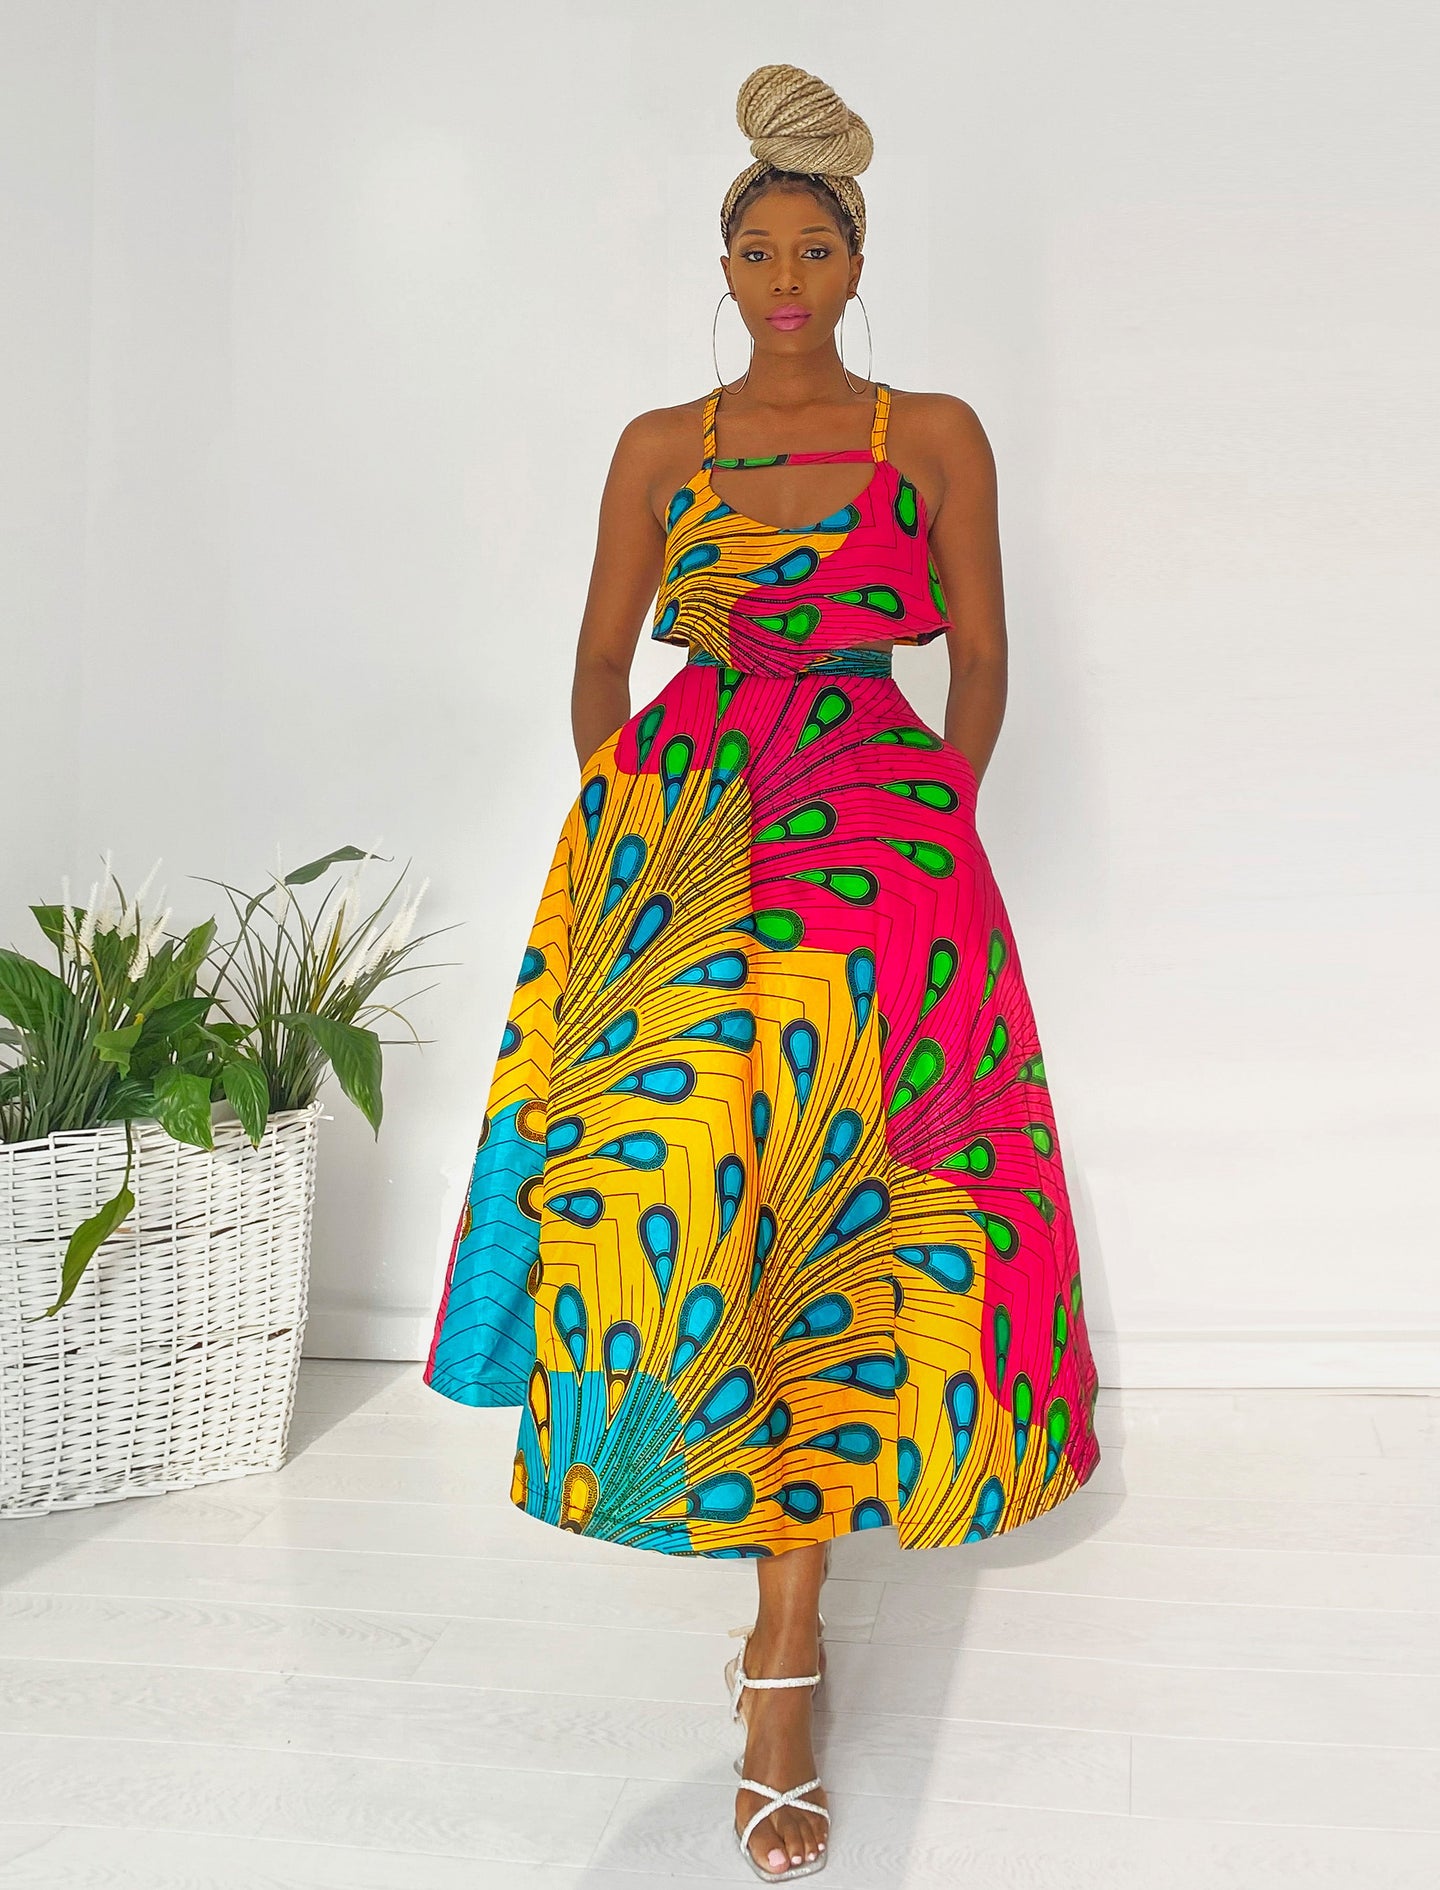 African dress styles for women